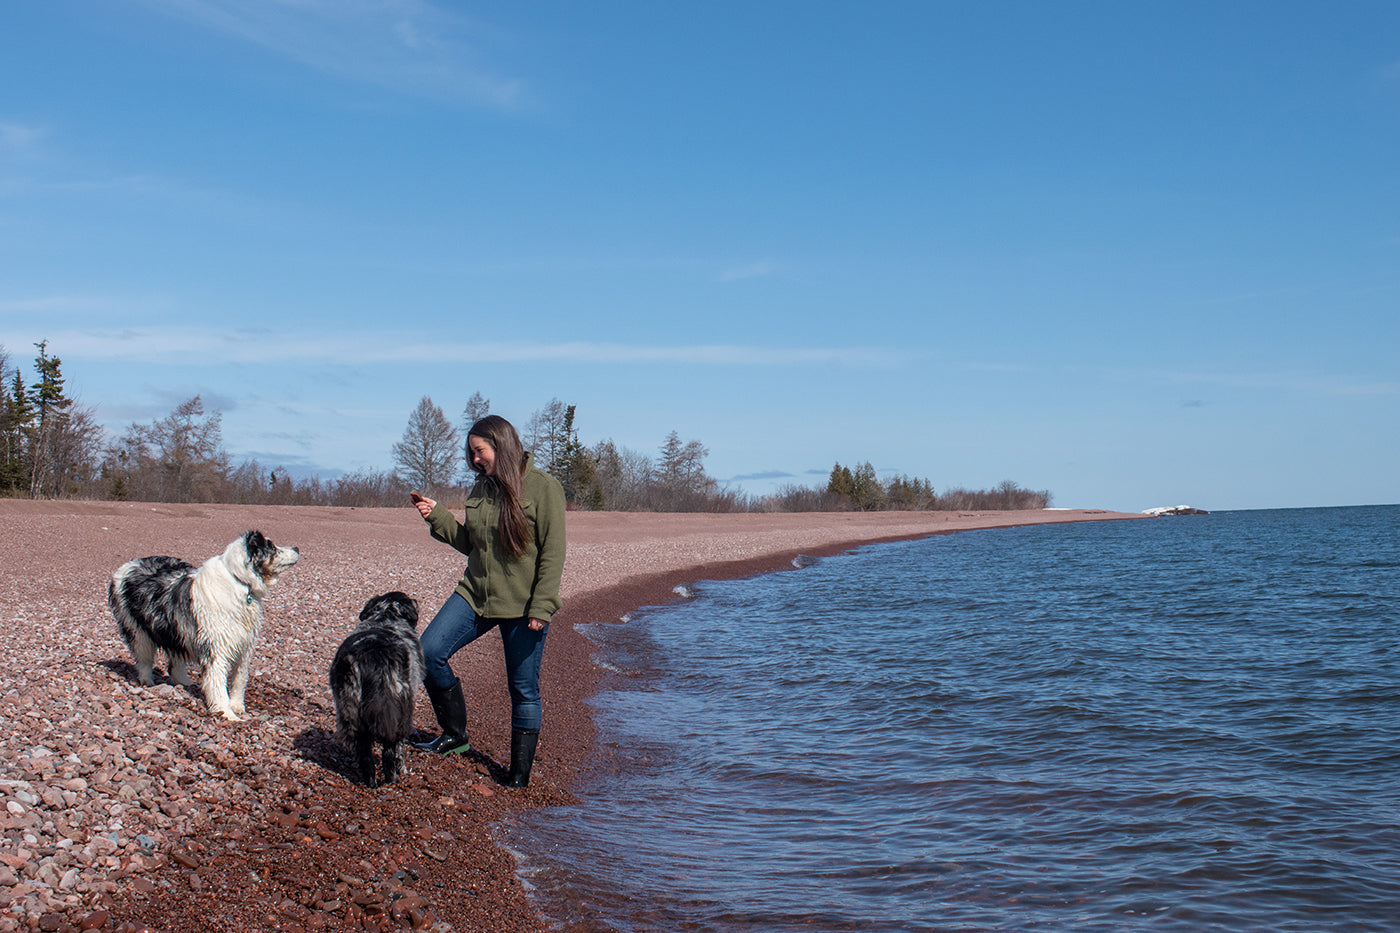 A woman and her two dogs stand near the shore of a lake.